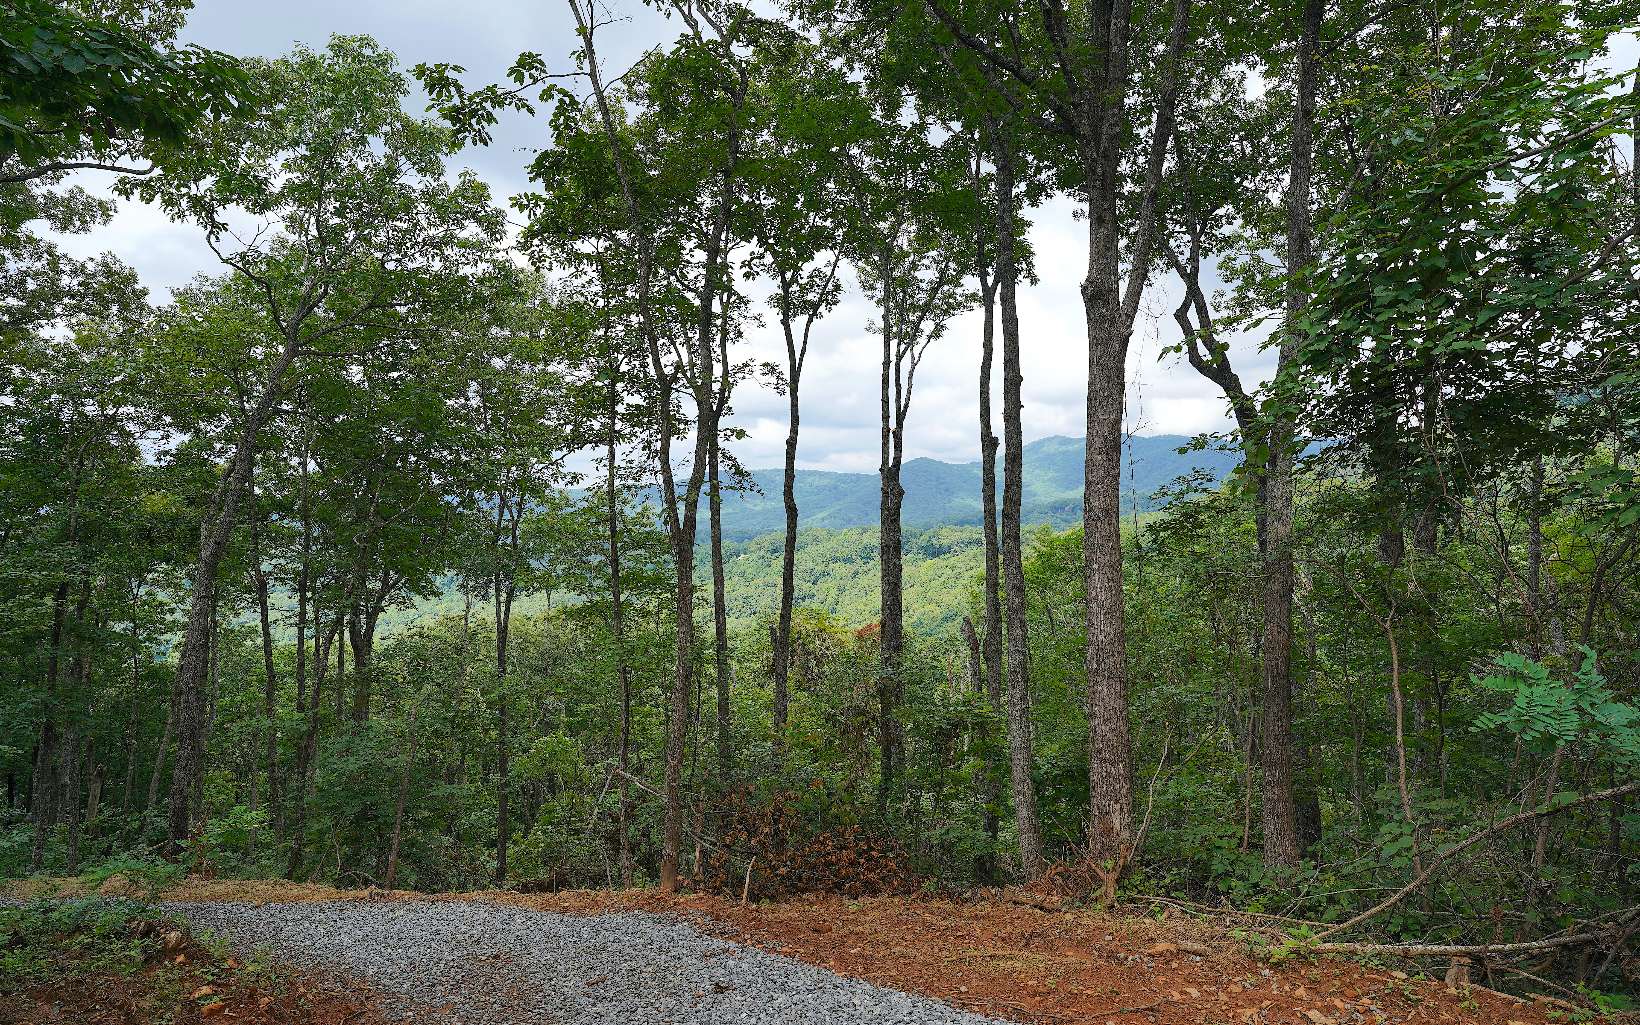 1.59 acre lot on Double Knob Mountain in the exclusive ““Eagles View “ Subdivision. This lot is already partially cleared with a driveway leading to a private building site. Underground power, telephone already in place, and a has a new 10 gpm well with excellent tasting Spring water. Lots 4 and 6 are also available for additional privacy. Don't miss your opportunity to own a piece of the North Georgia Mountains!